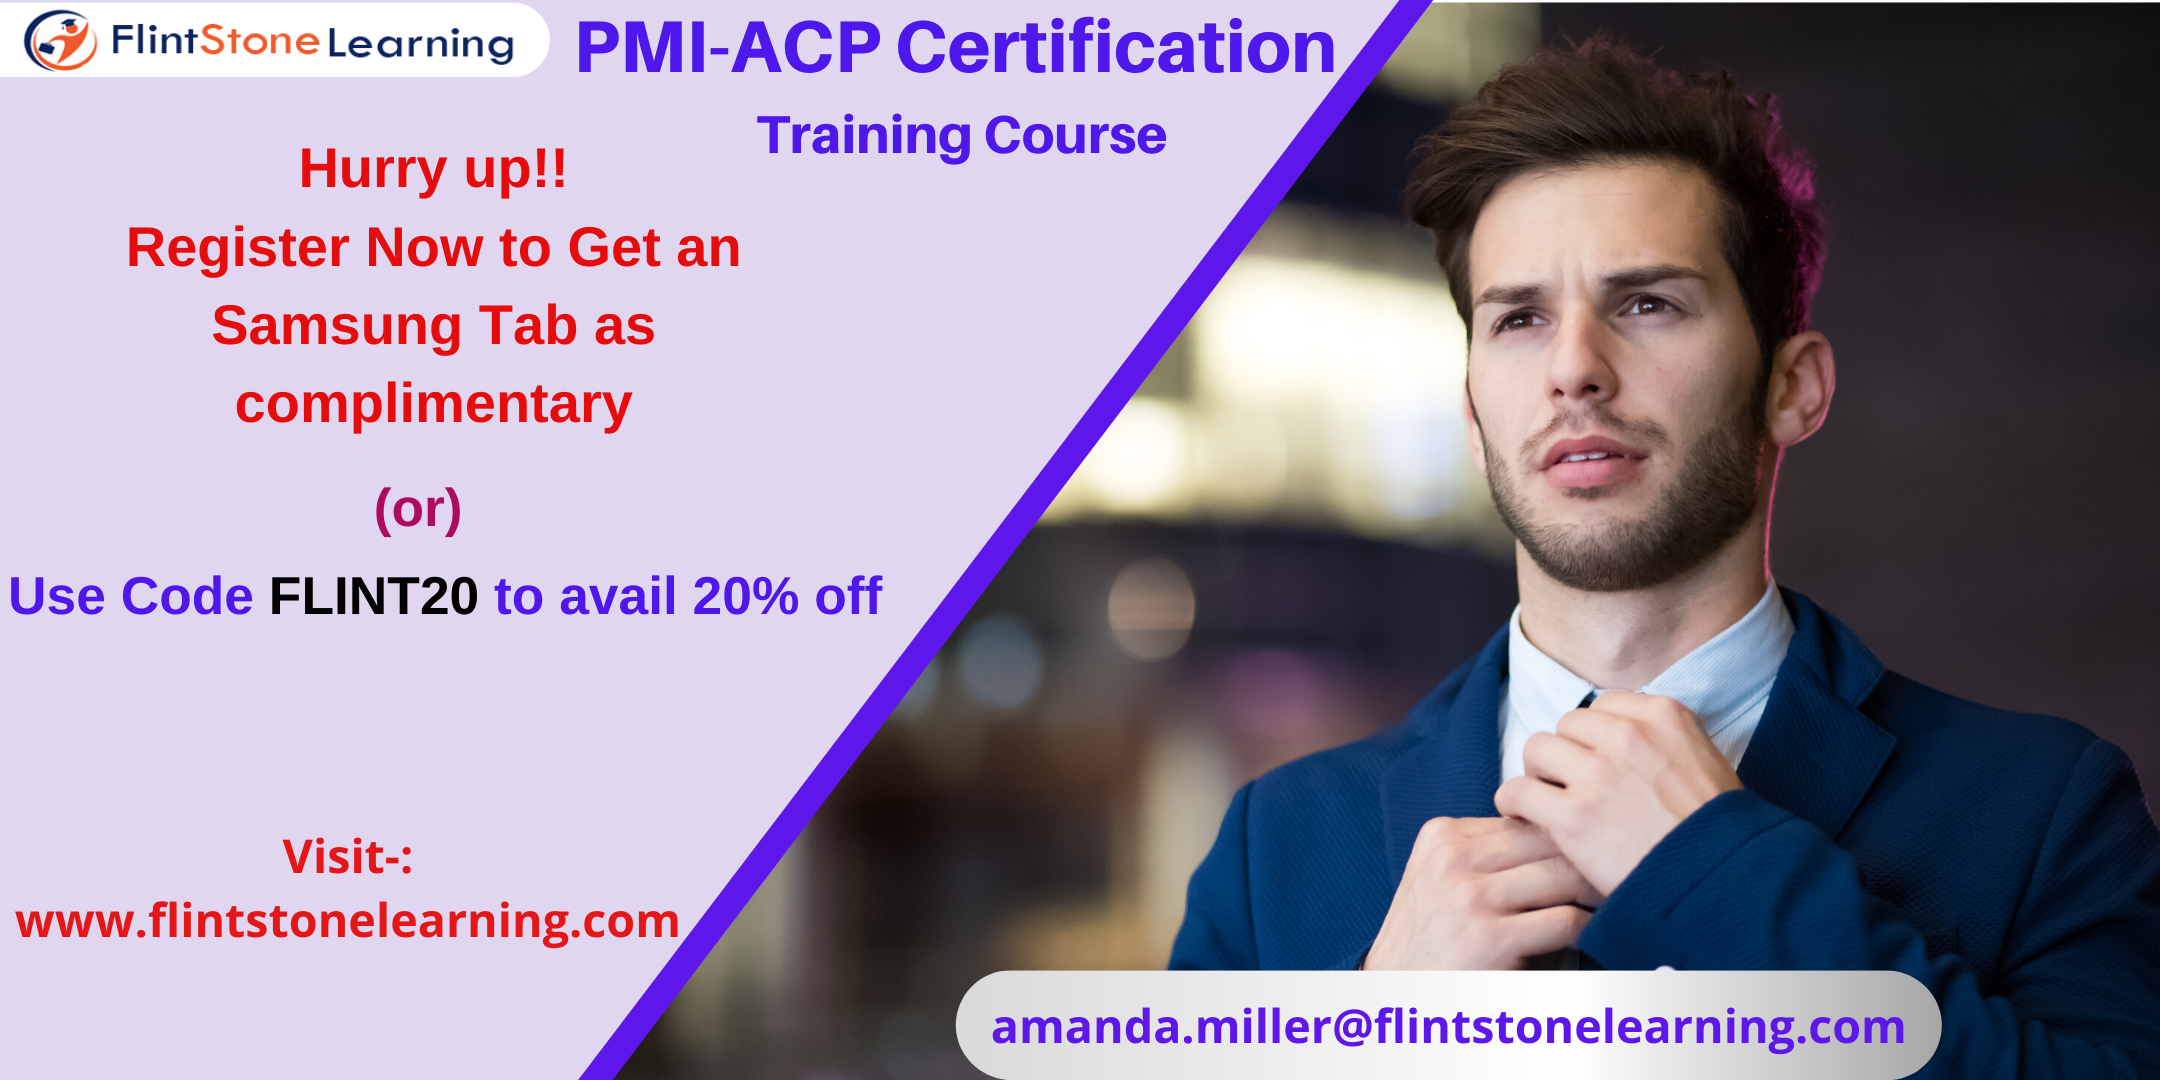 PMI-ACP Certification Training Course in Corvallis, OR